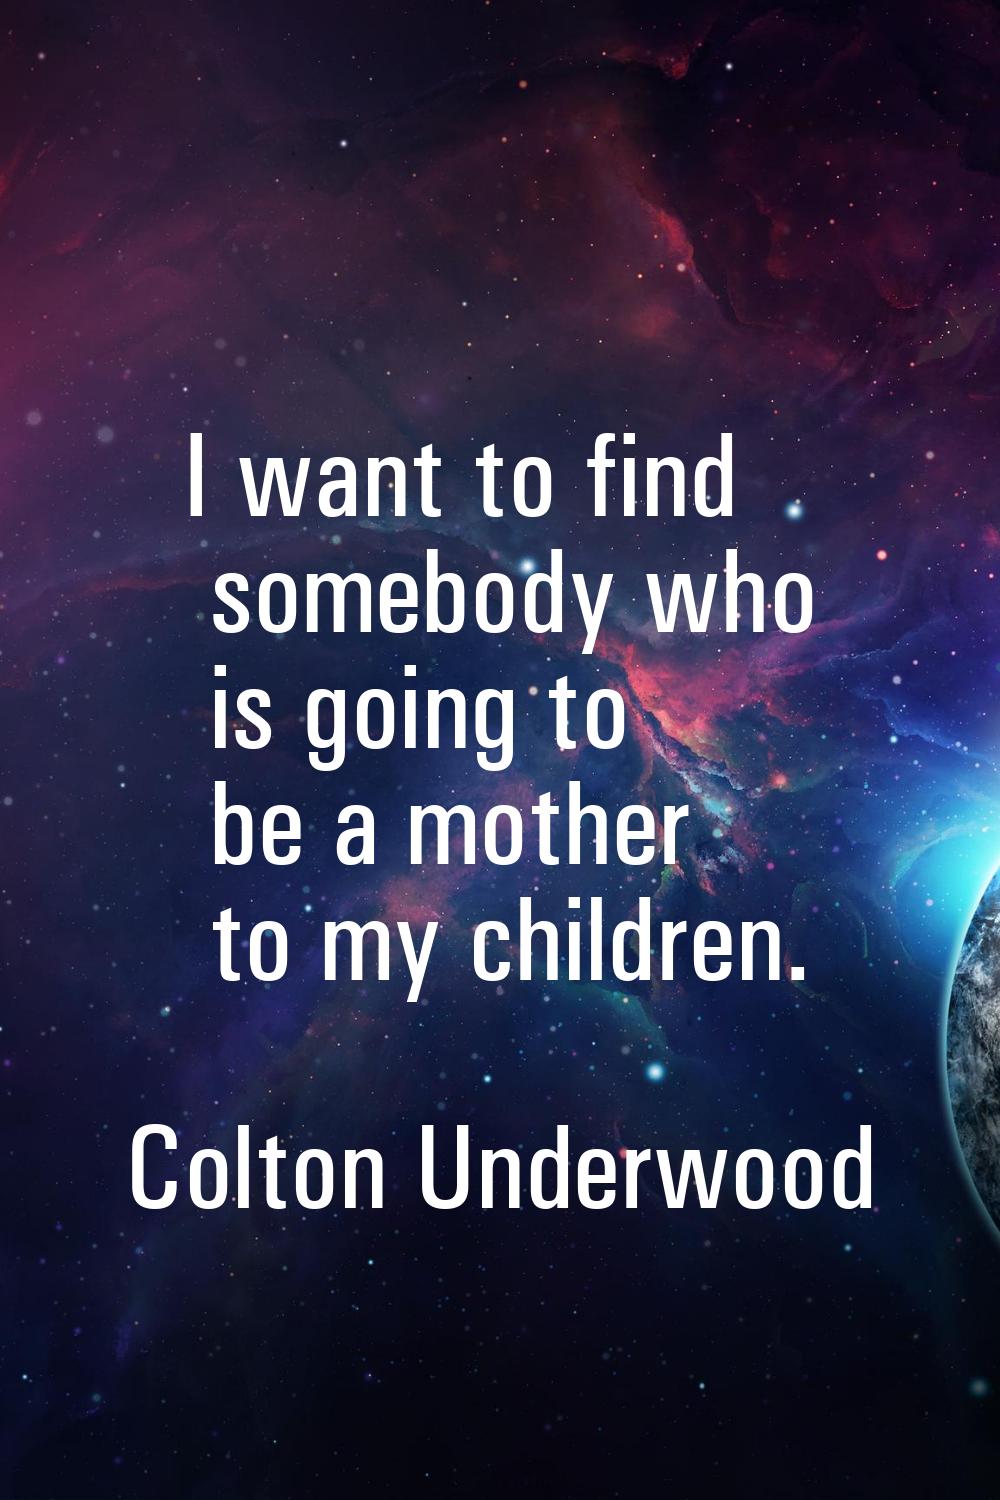 I want to find somebody who is going to be a mother to my children.